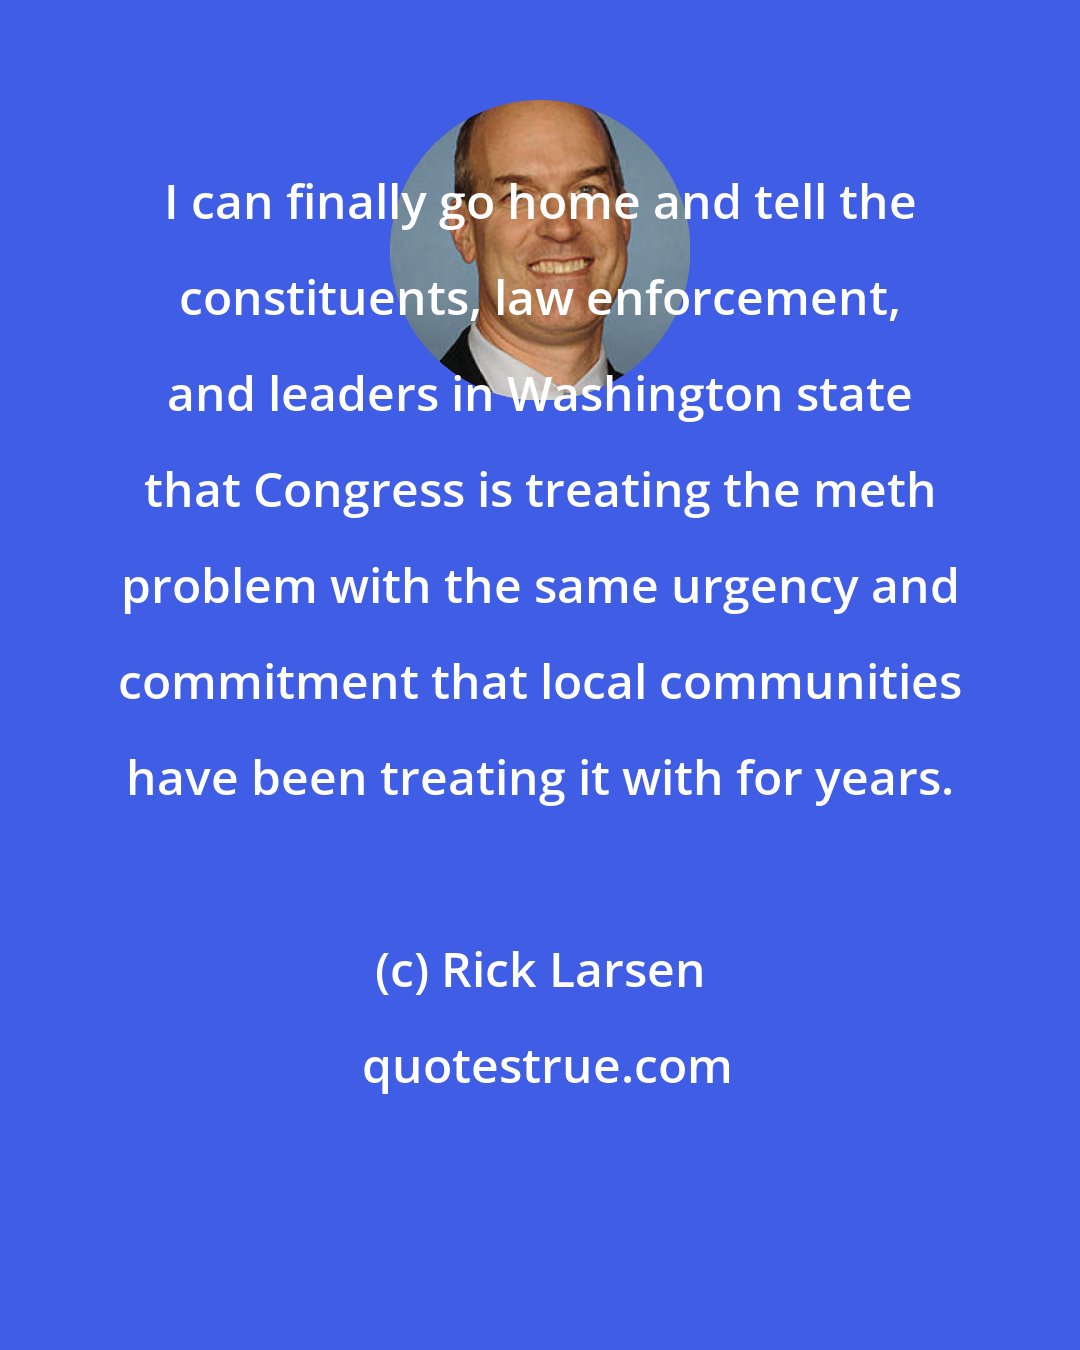 Rick Larsen: I can finally go home and tell the constituents, law enforcement, and leaders in Washington state that Congress is treating the meth problem with the same urgency and commitment that local communities have been treating it with for years.